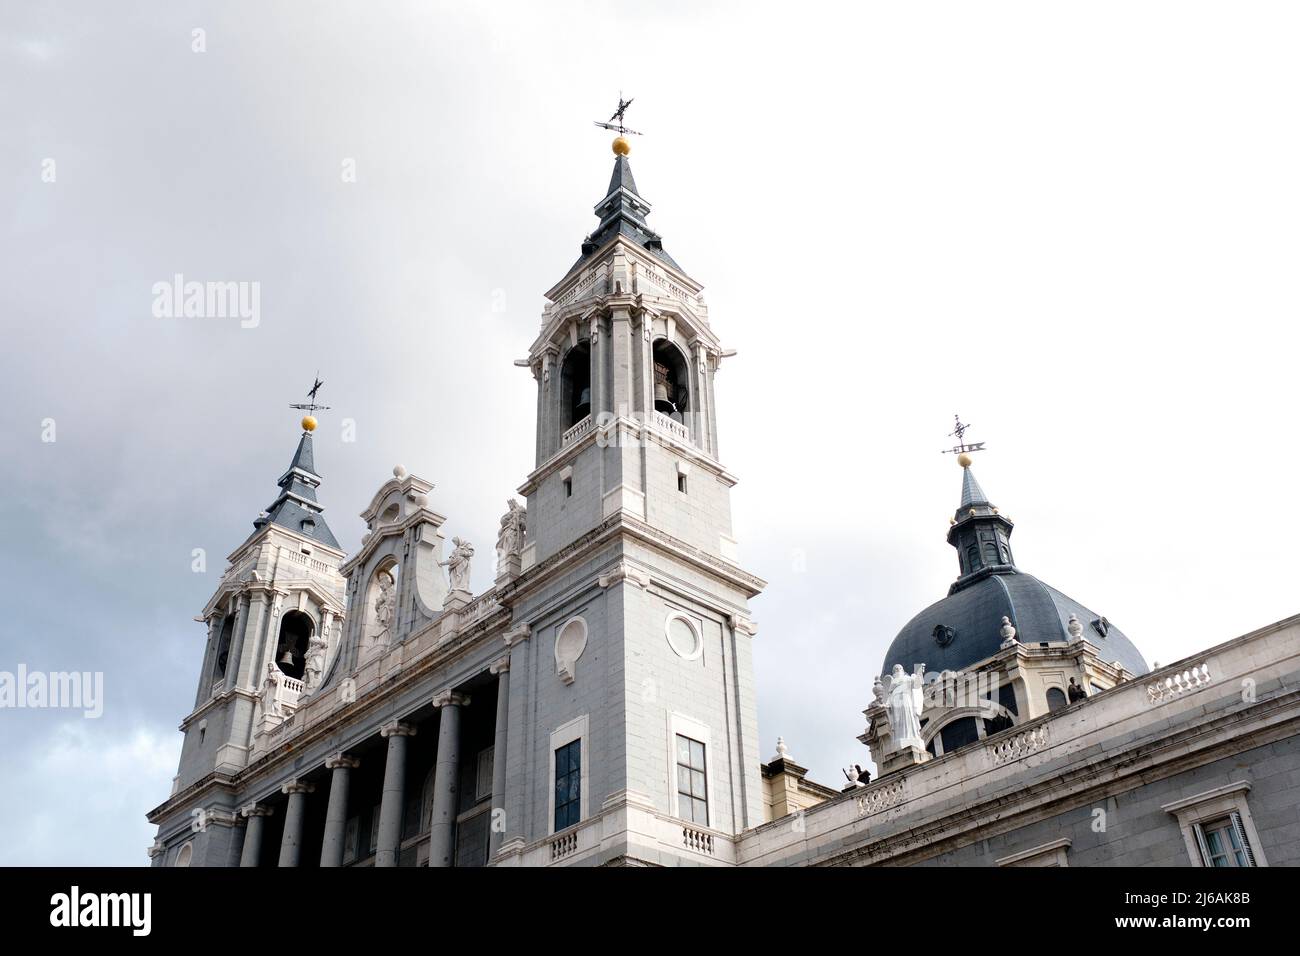 Low Angle View of Bell Towers, Almudena Cathedral, against Gray Sky, Madrid, Spain Stock Photo